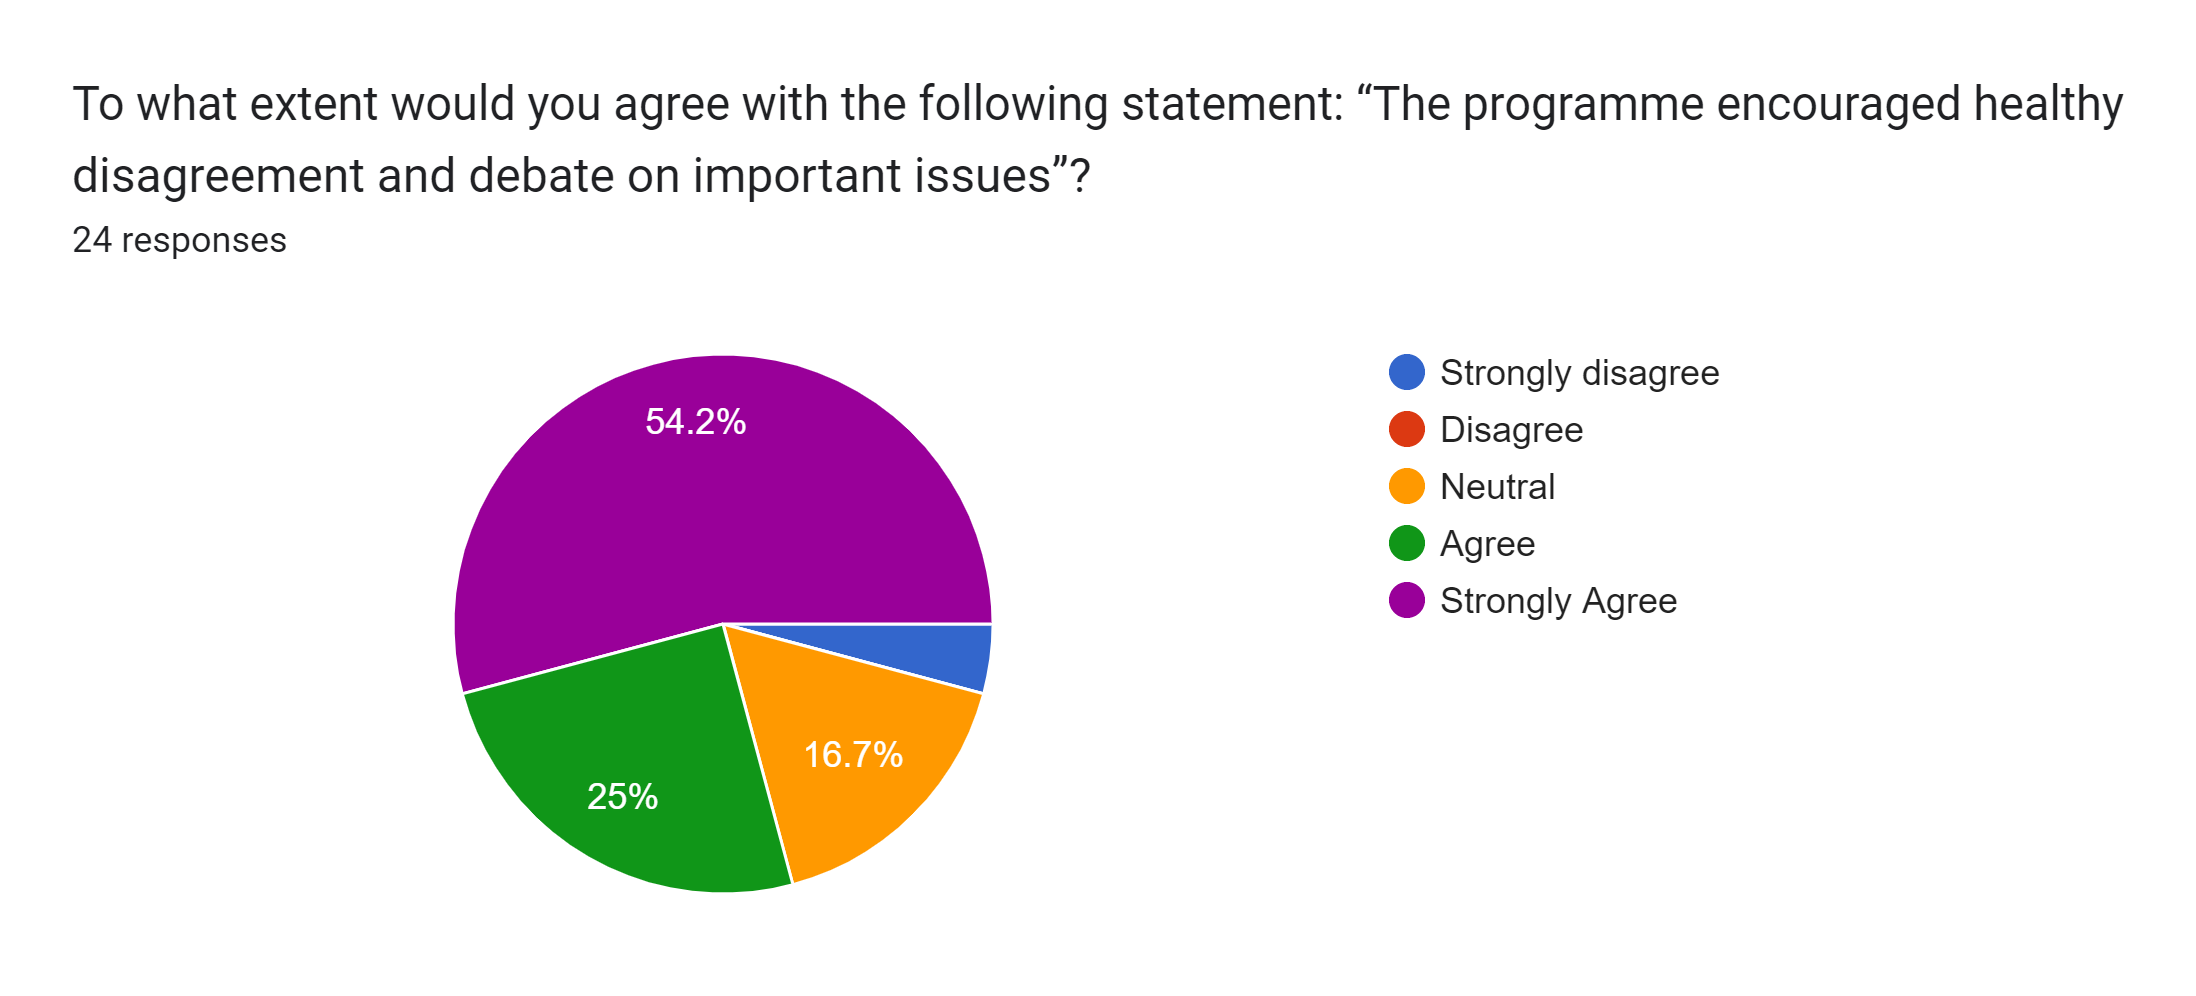 Forms response chart. Question title: To what extent would you agree with the following statement: “The programme encouraged healthy disagreement and debate on important issues”?
. Number of responses: 24 responses.